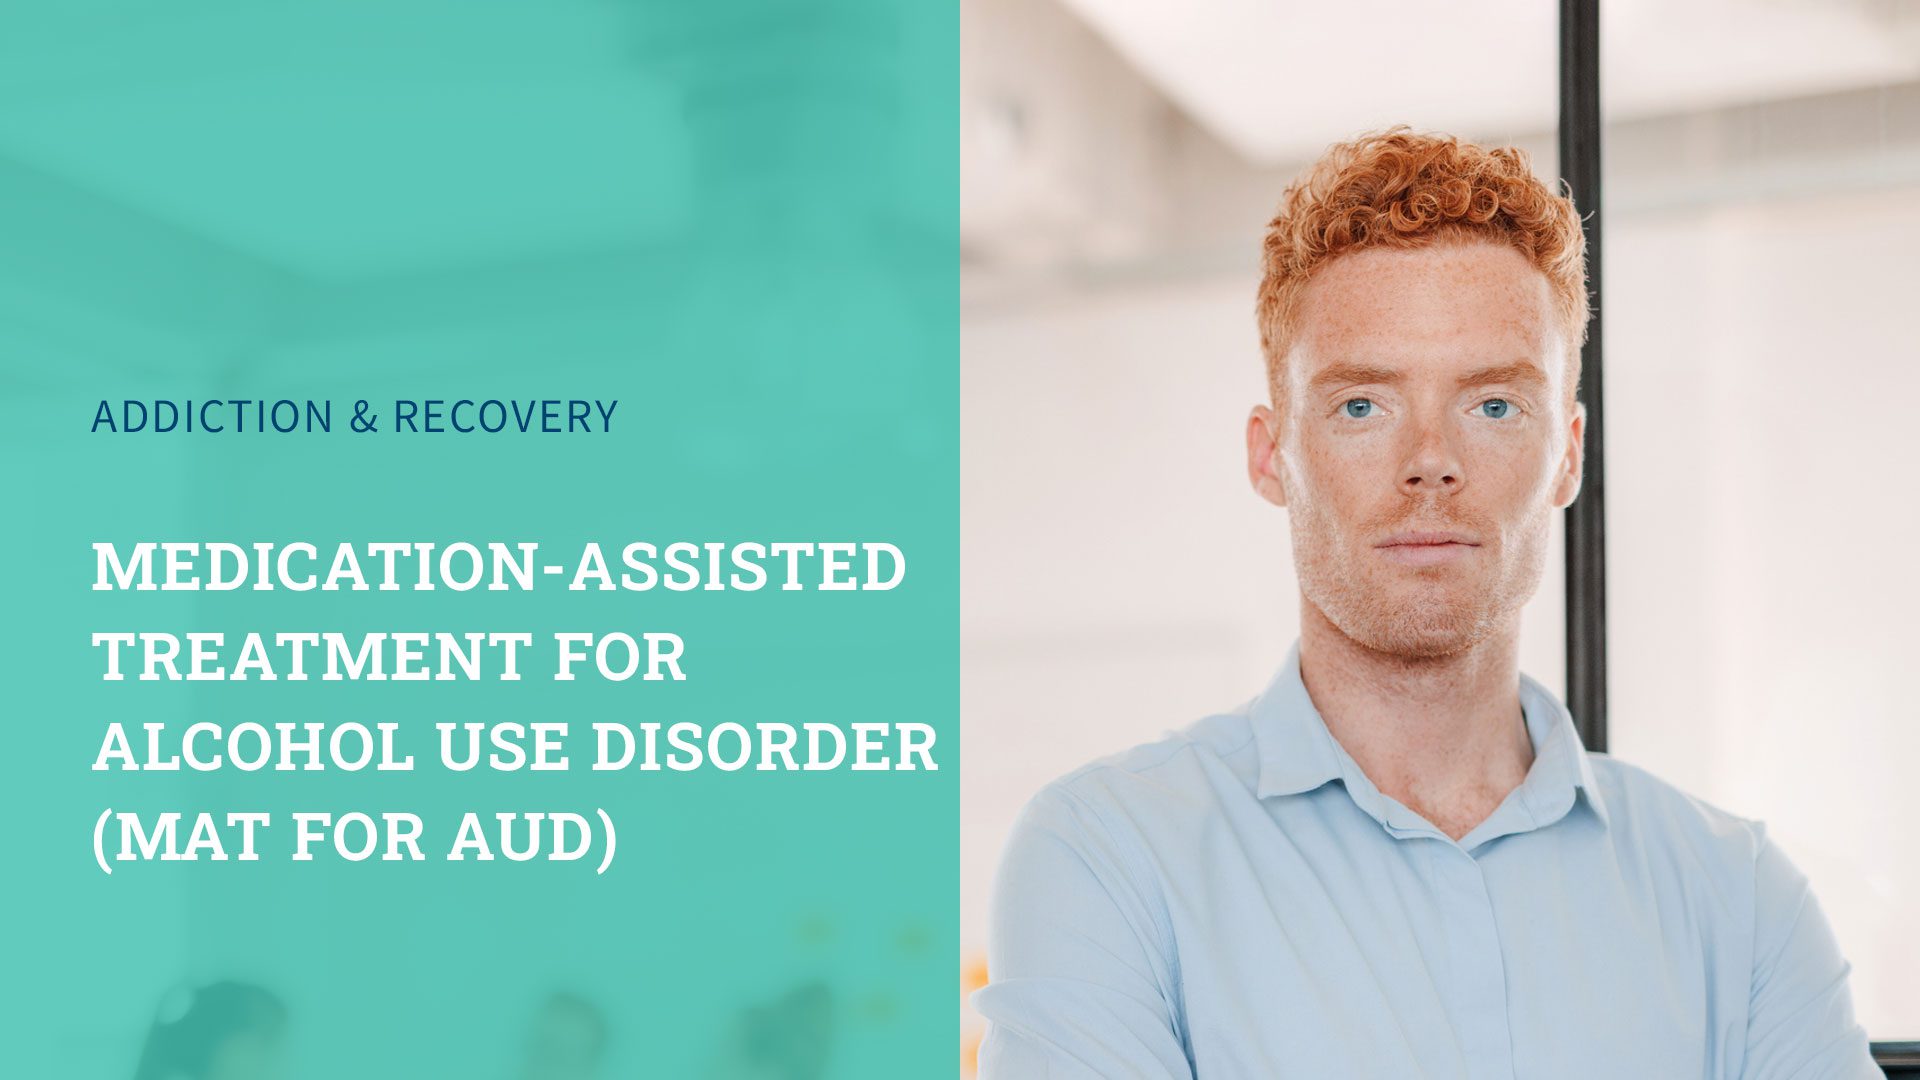 Medication-Assisted Treatment for Alcohol Use Disorder (MAT for AUD)